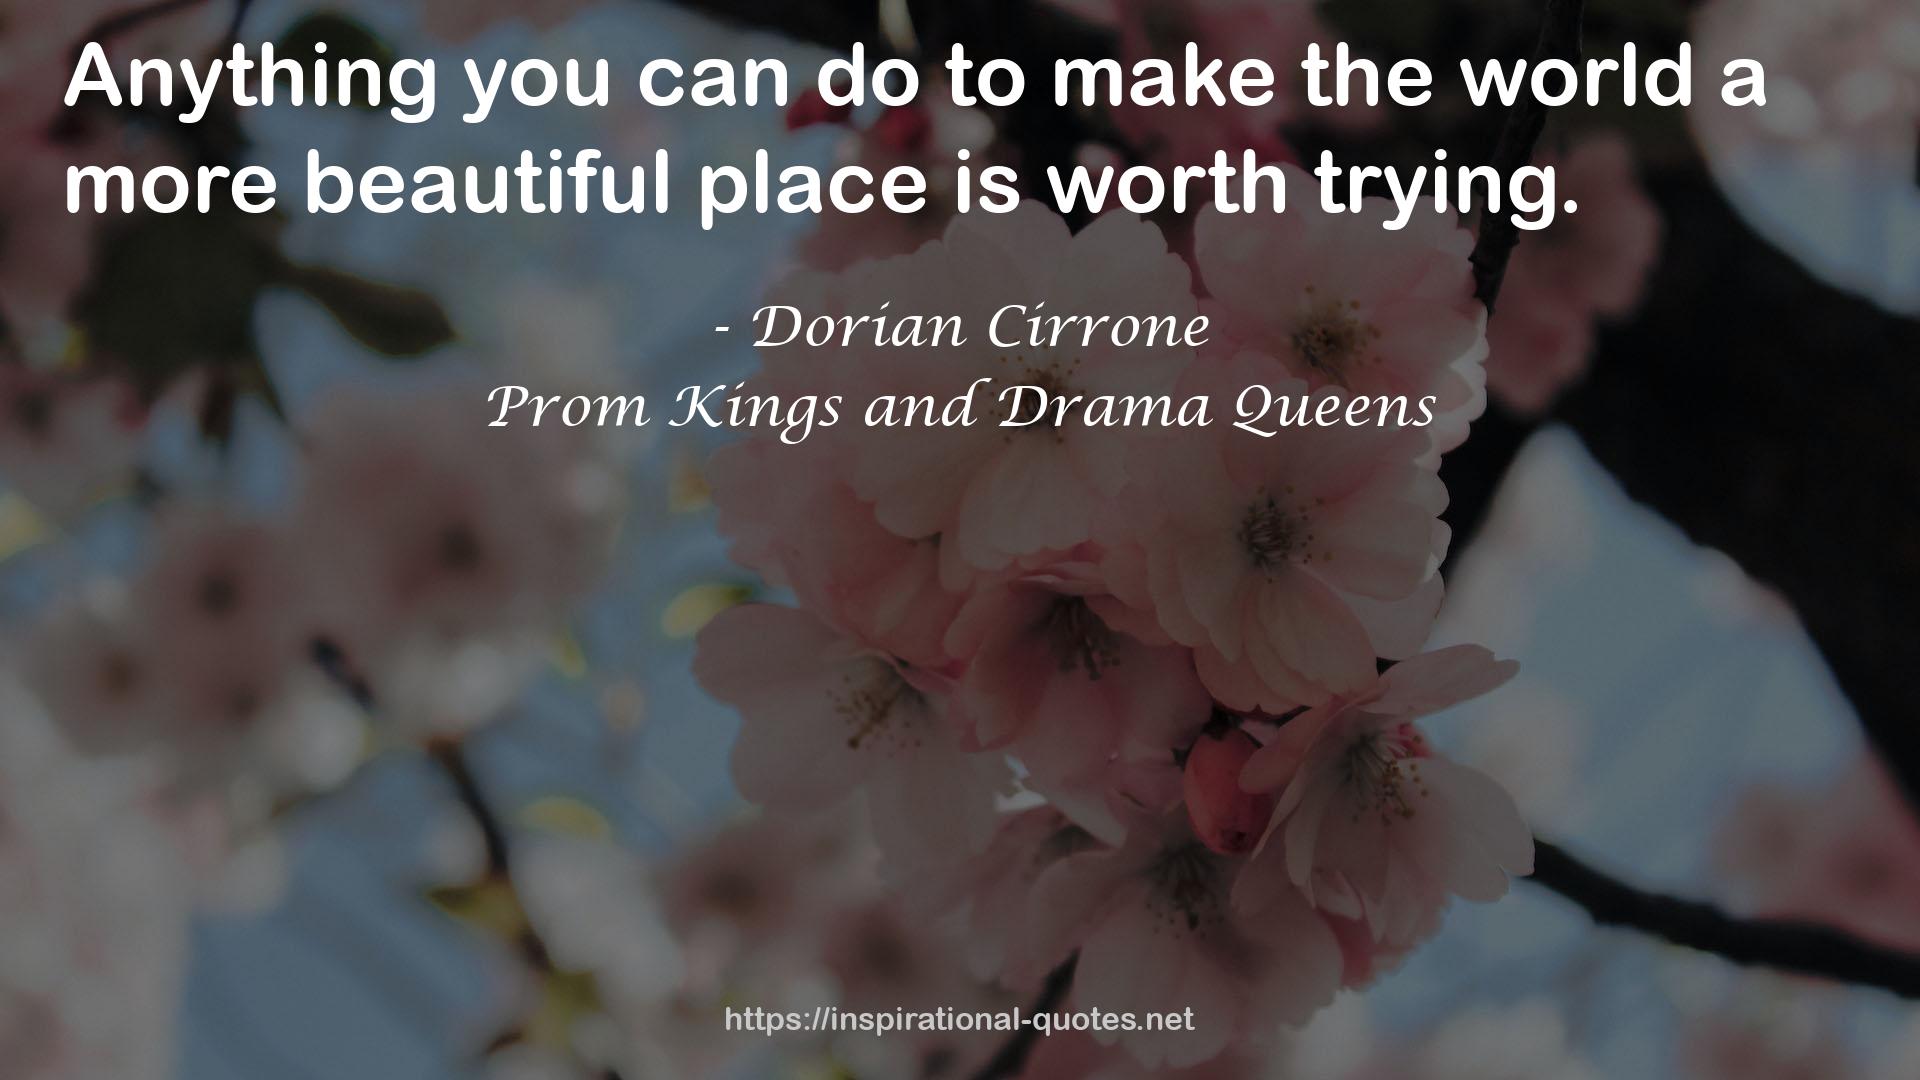 Prom Kings and Drama Queens QUOTES